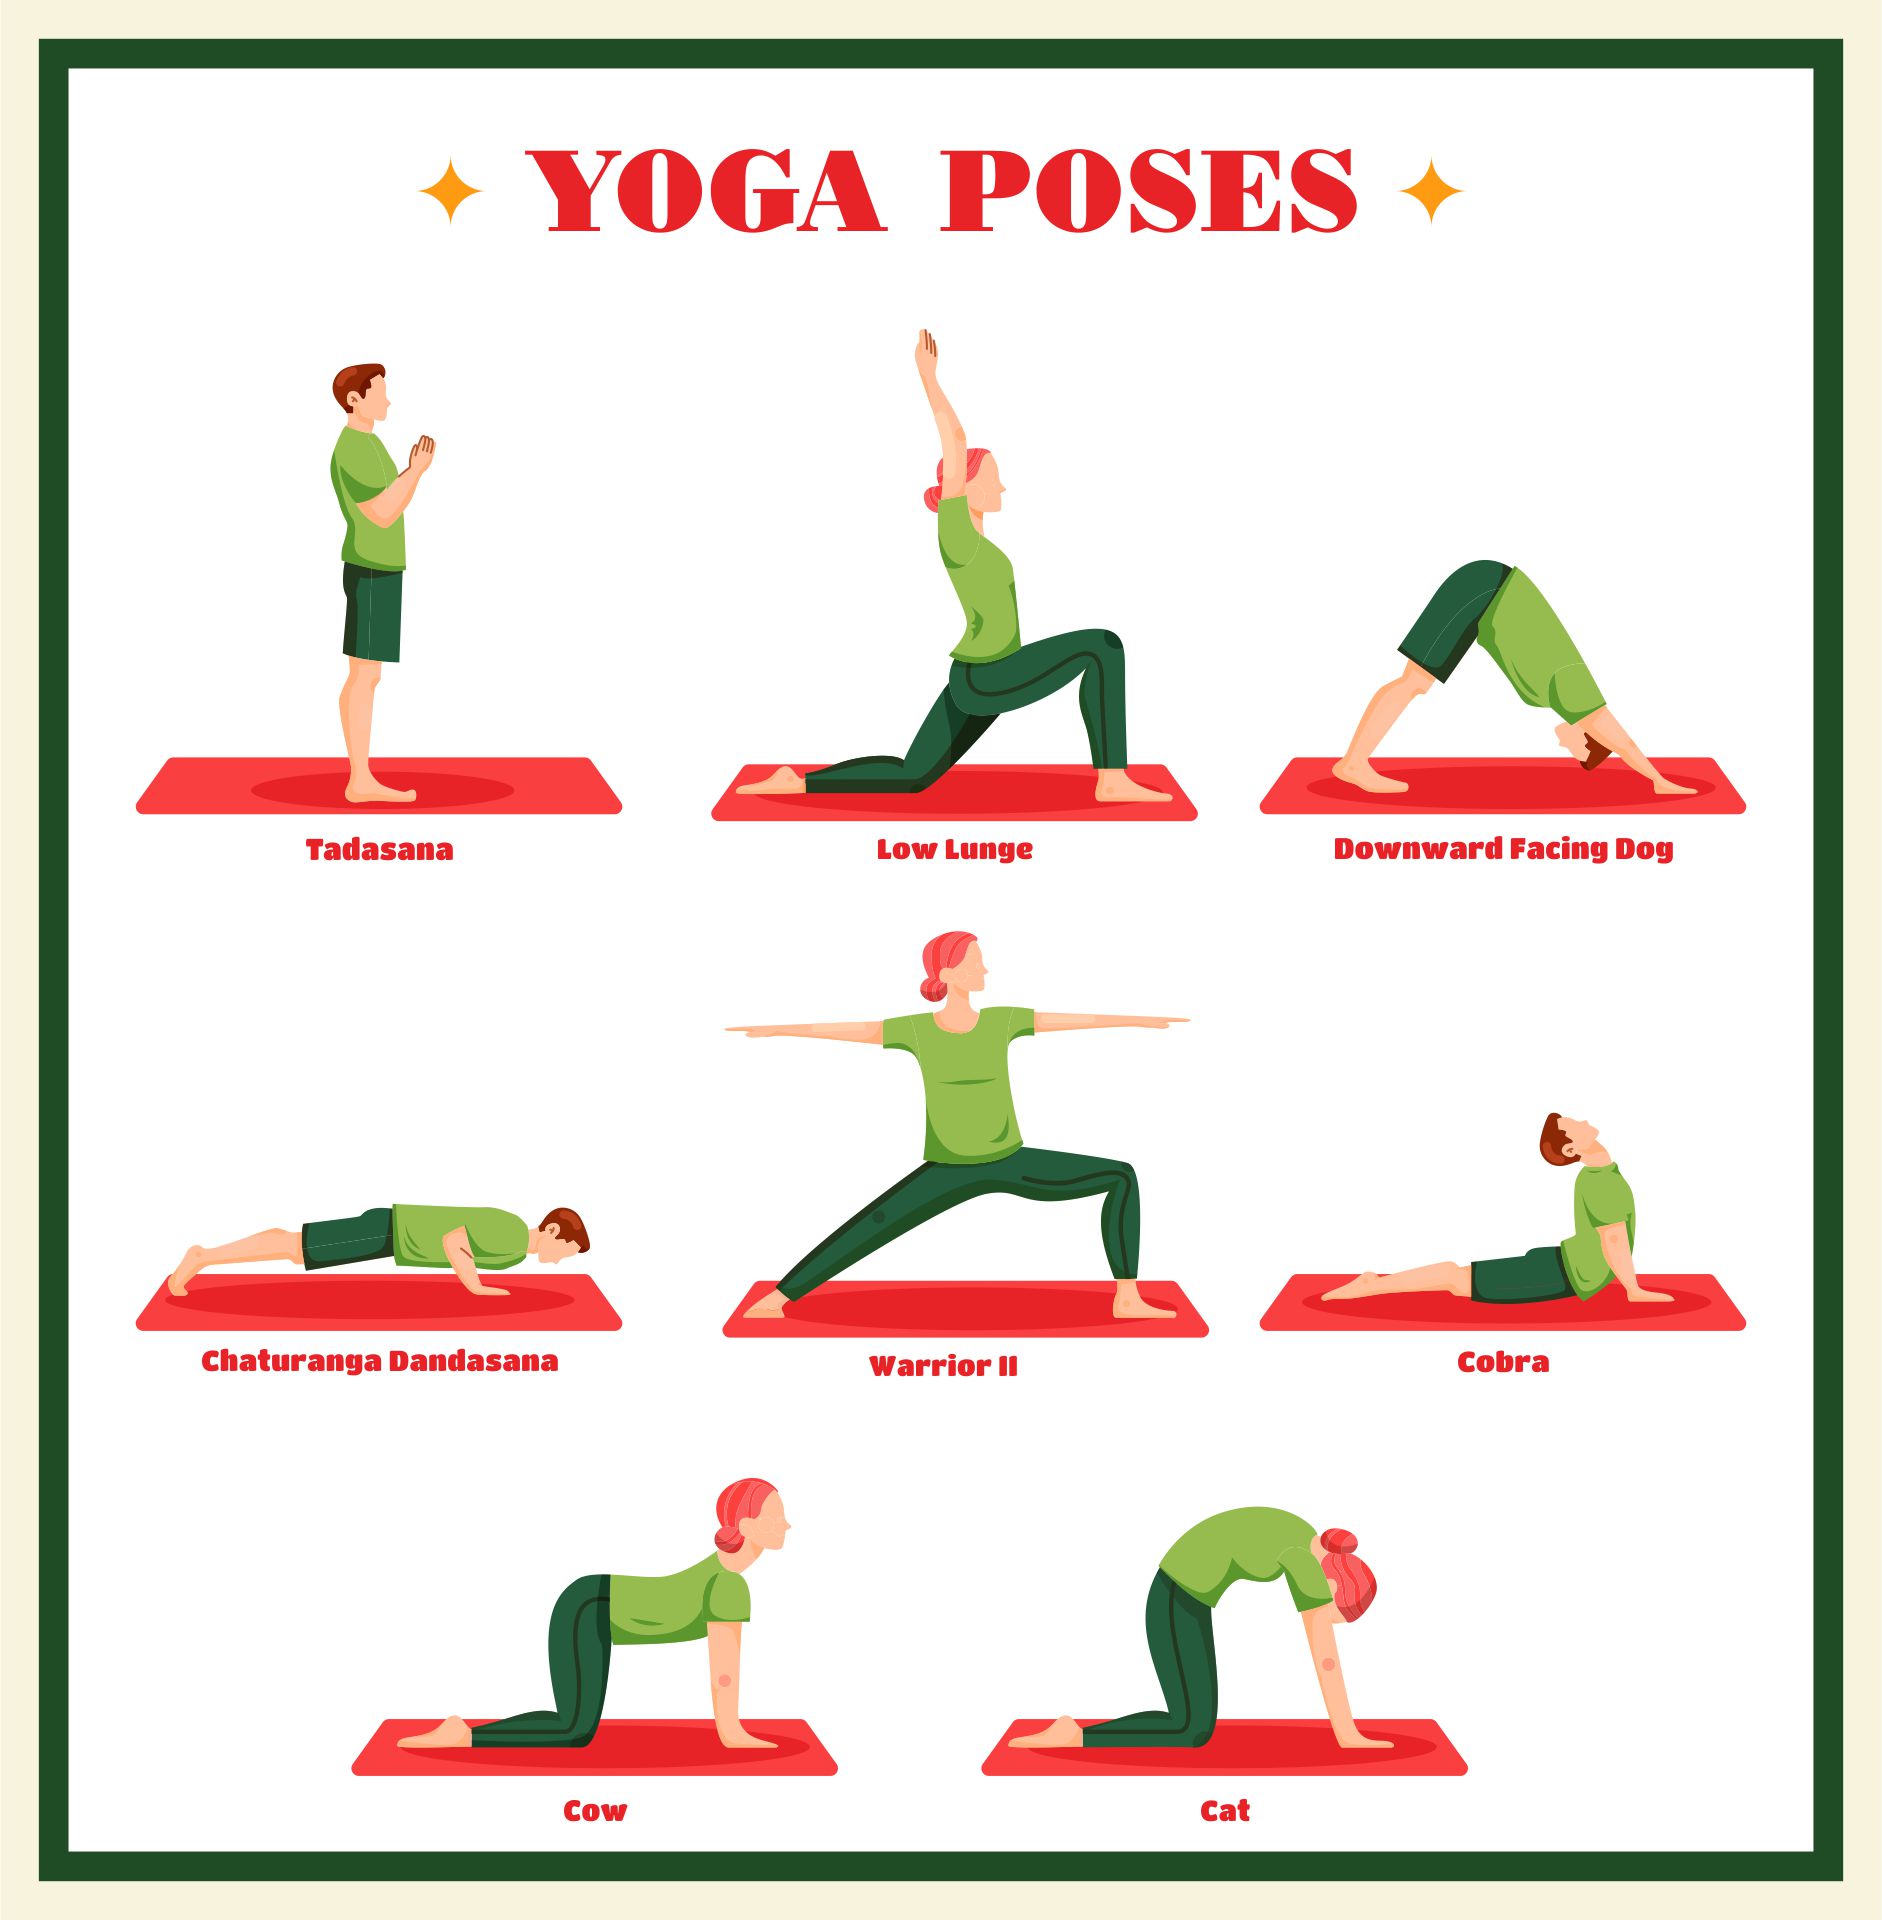 Complete List of All Yoga Poses And Asanas | Workout Trends